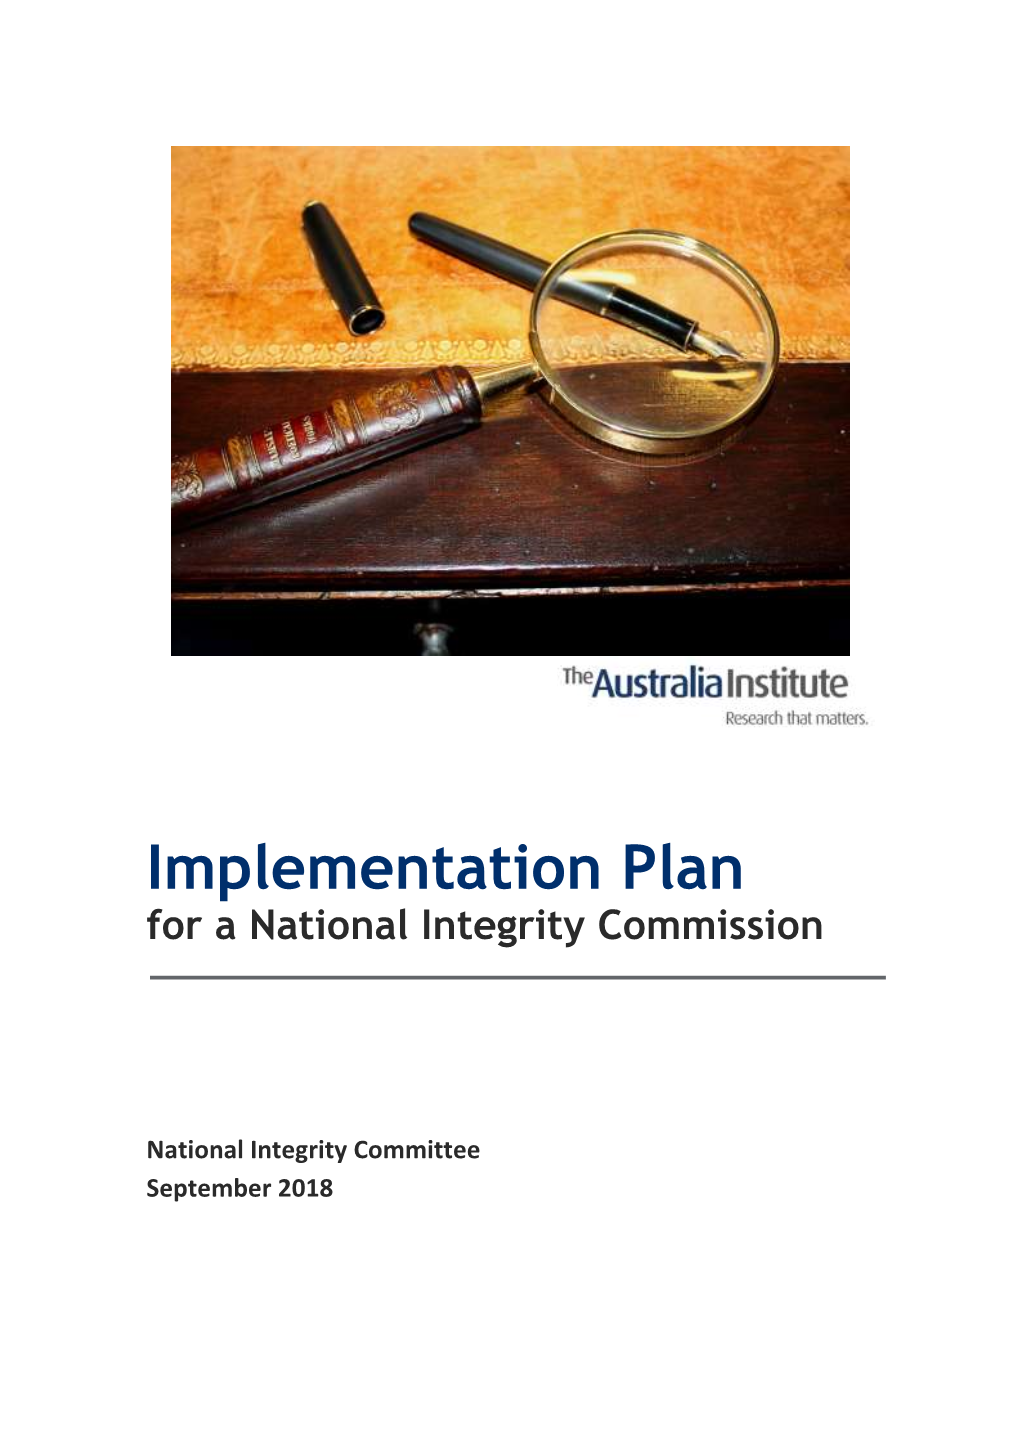 Implementation Plan for a National Integrity Commission